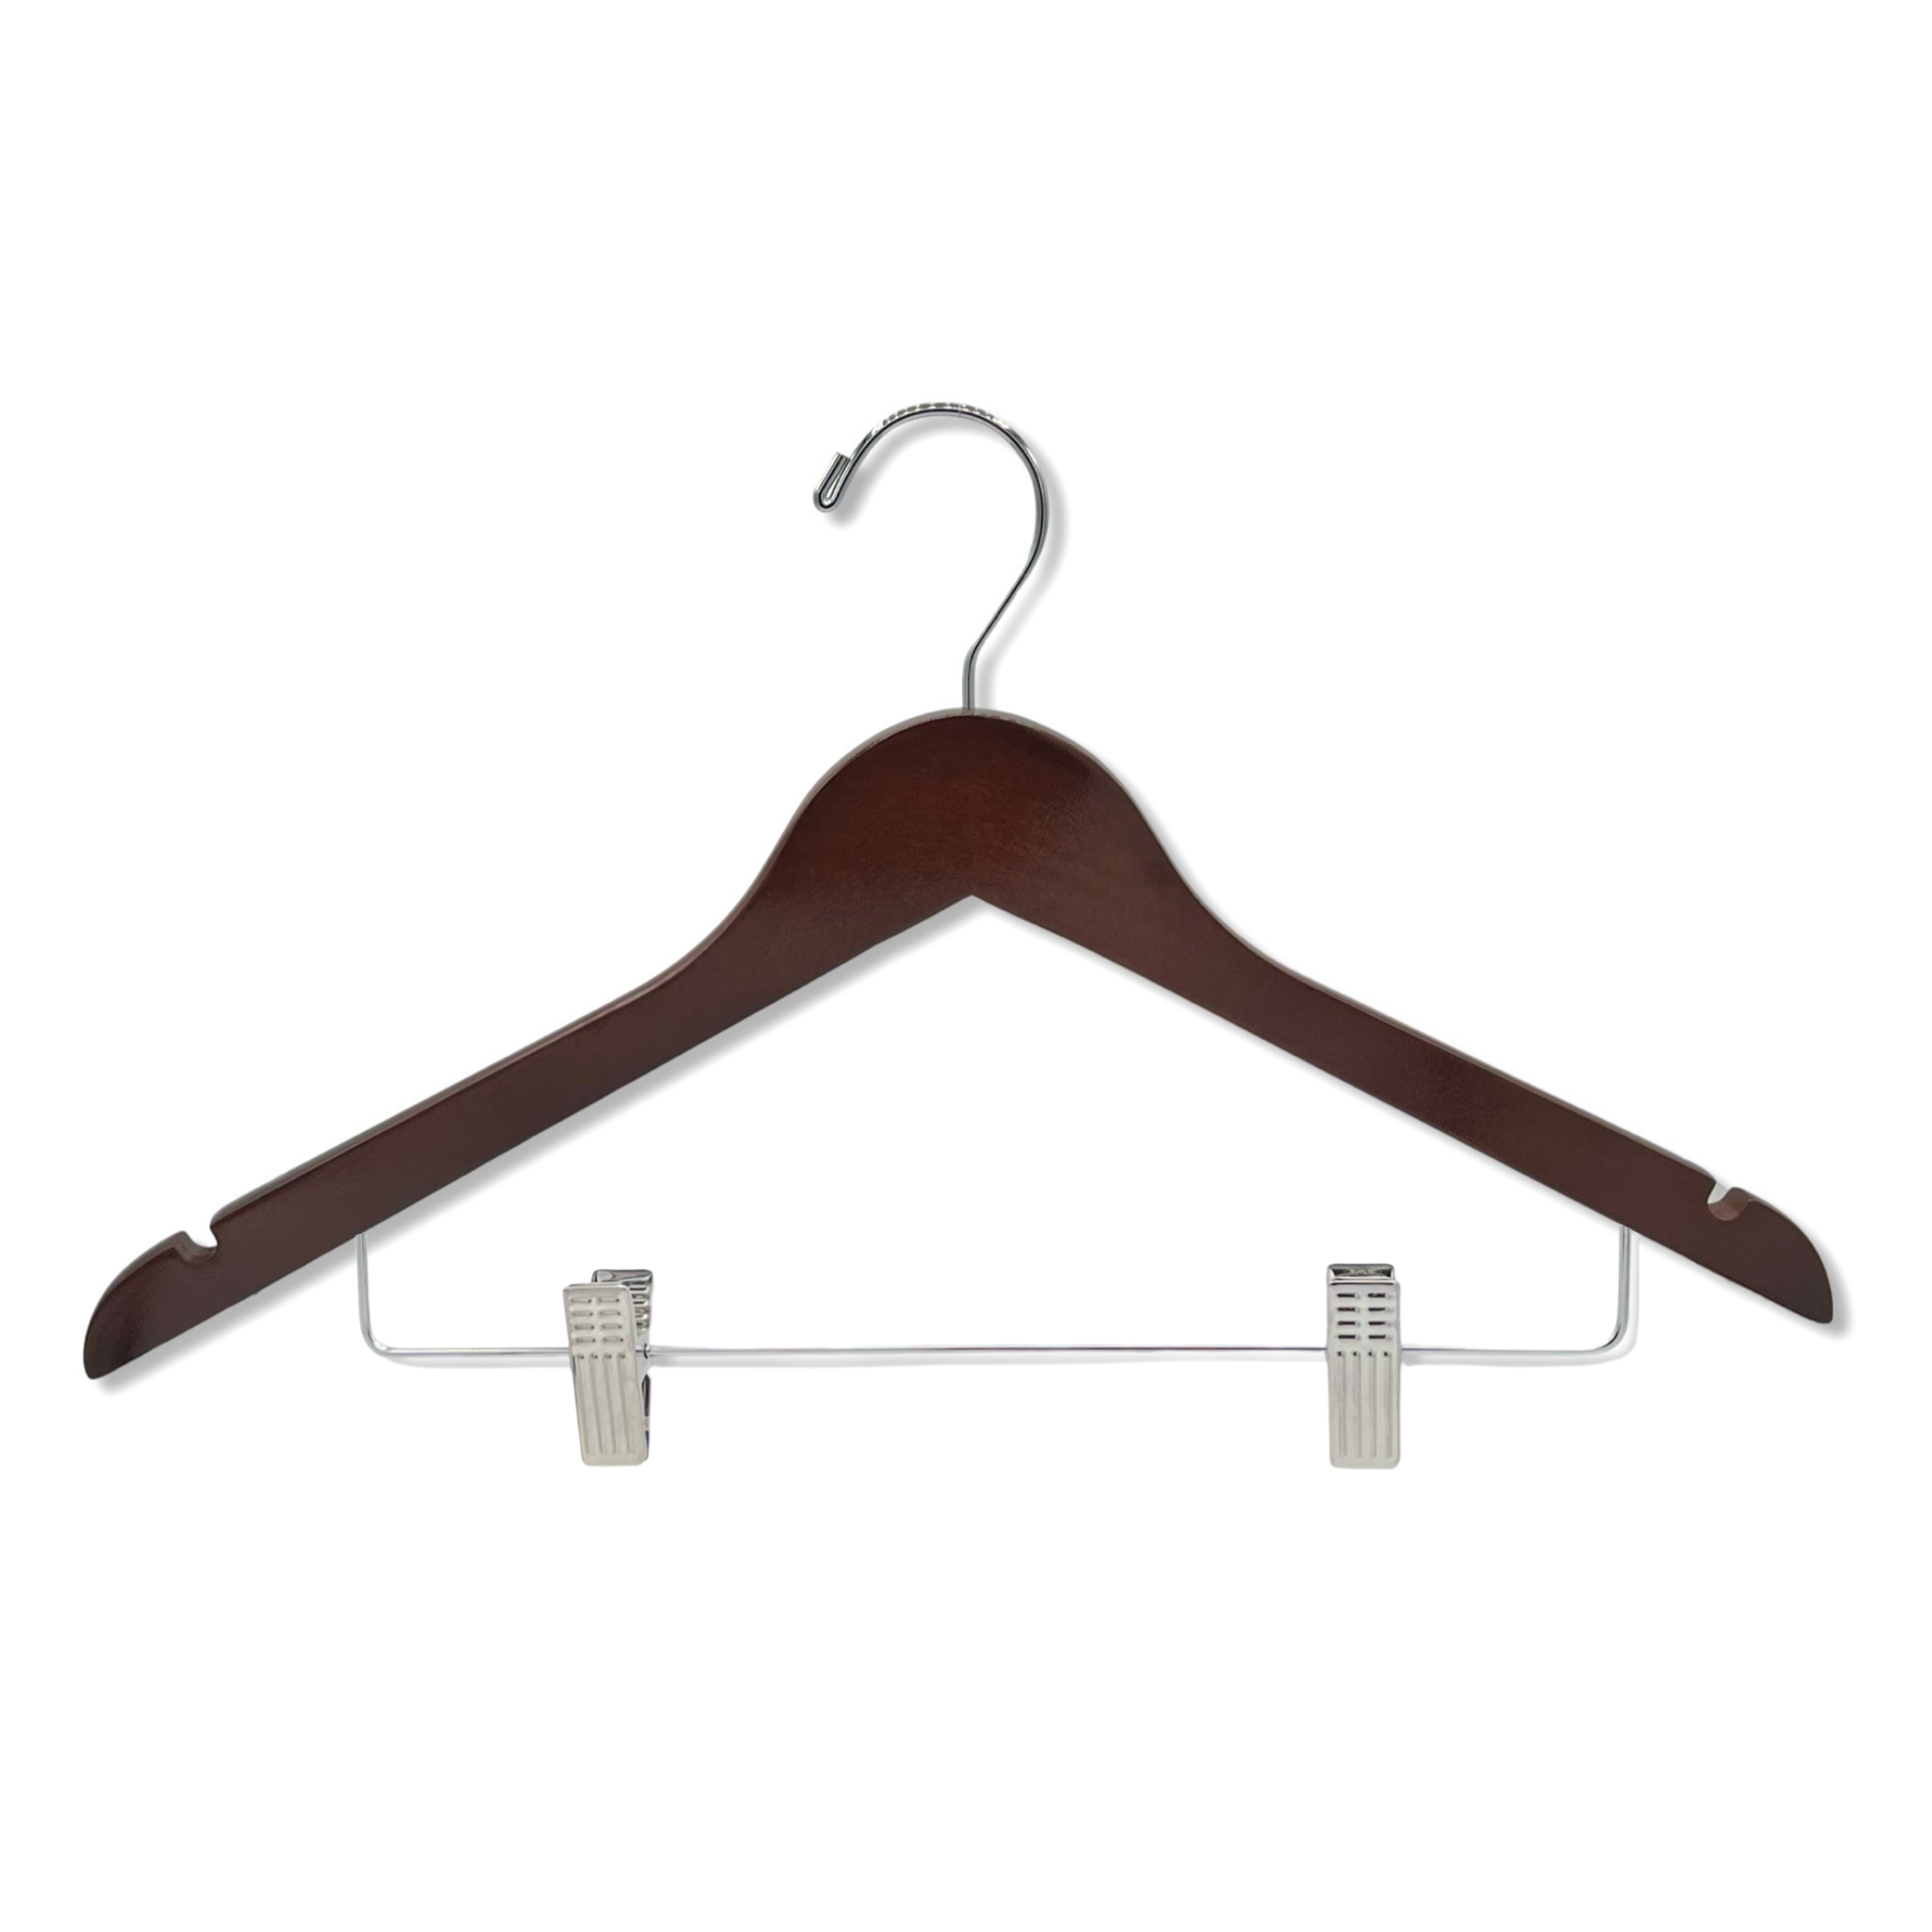 Dark Walnut Wood Combination Hanger with a silver hook, shoulder notches, and cushion clips for closets and stores